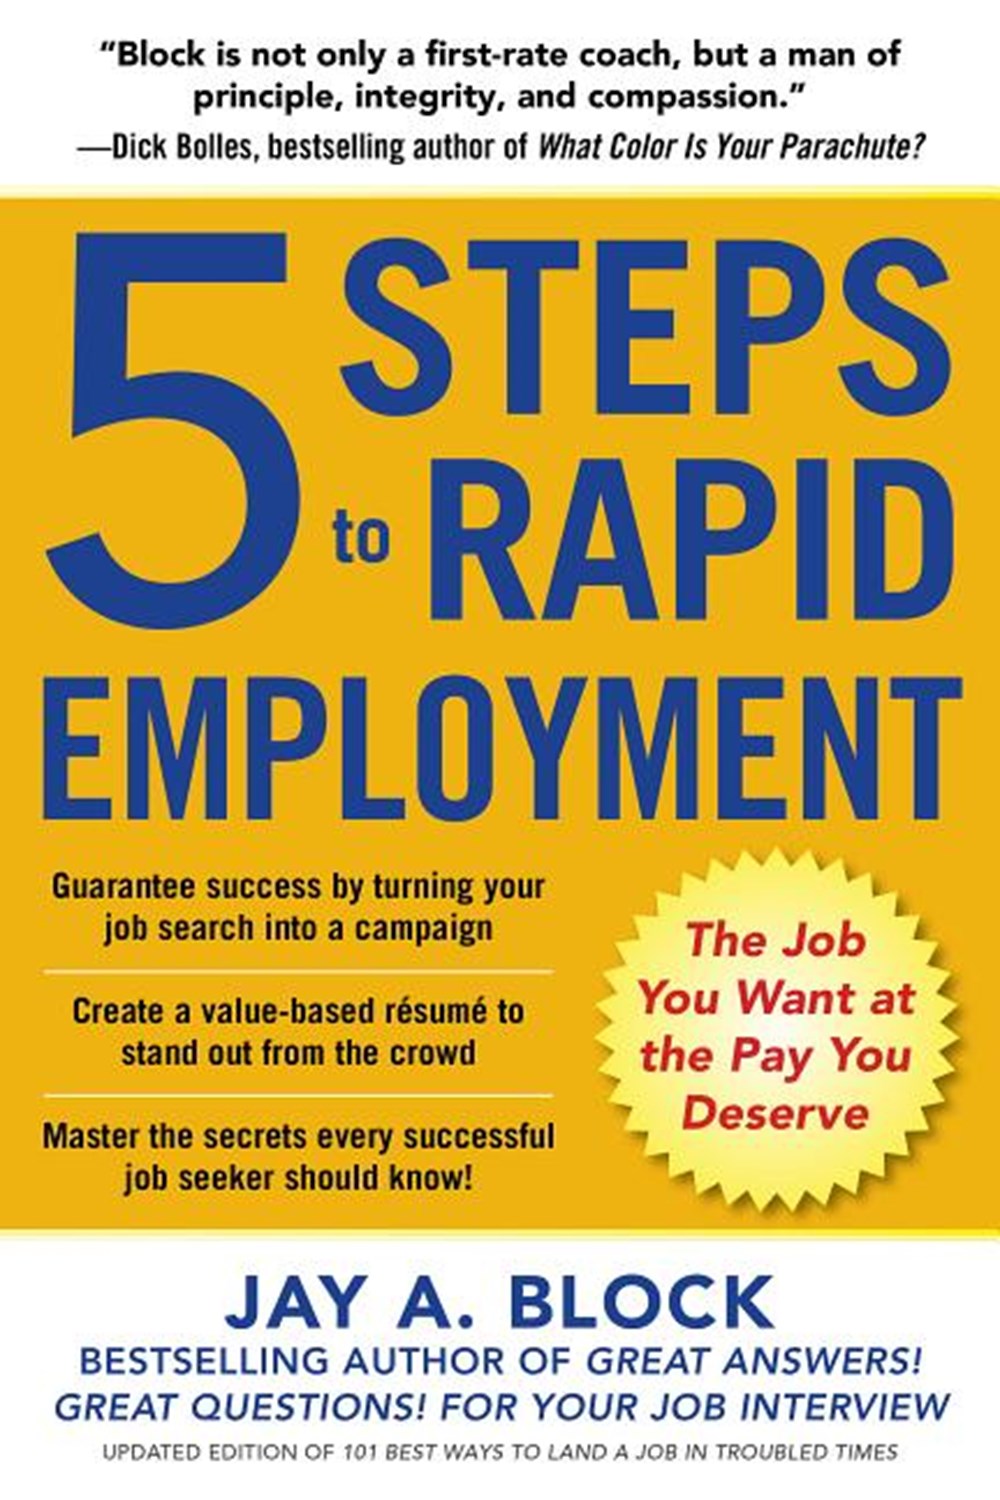 5 Steps to Rapid Employment The Job You Want at the Pay You Deserve